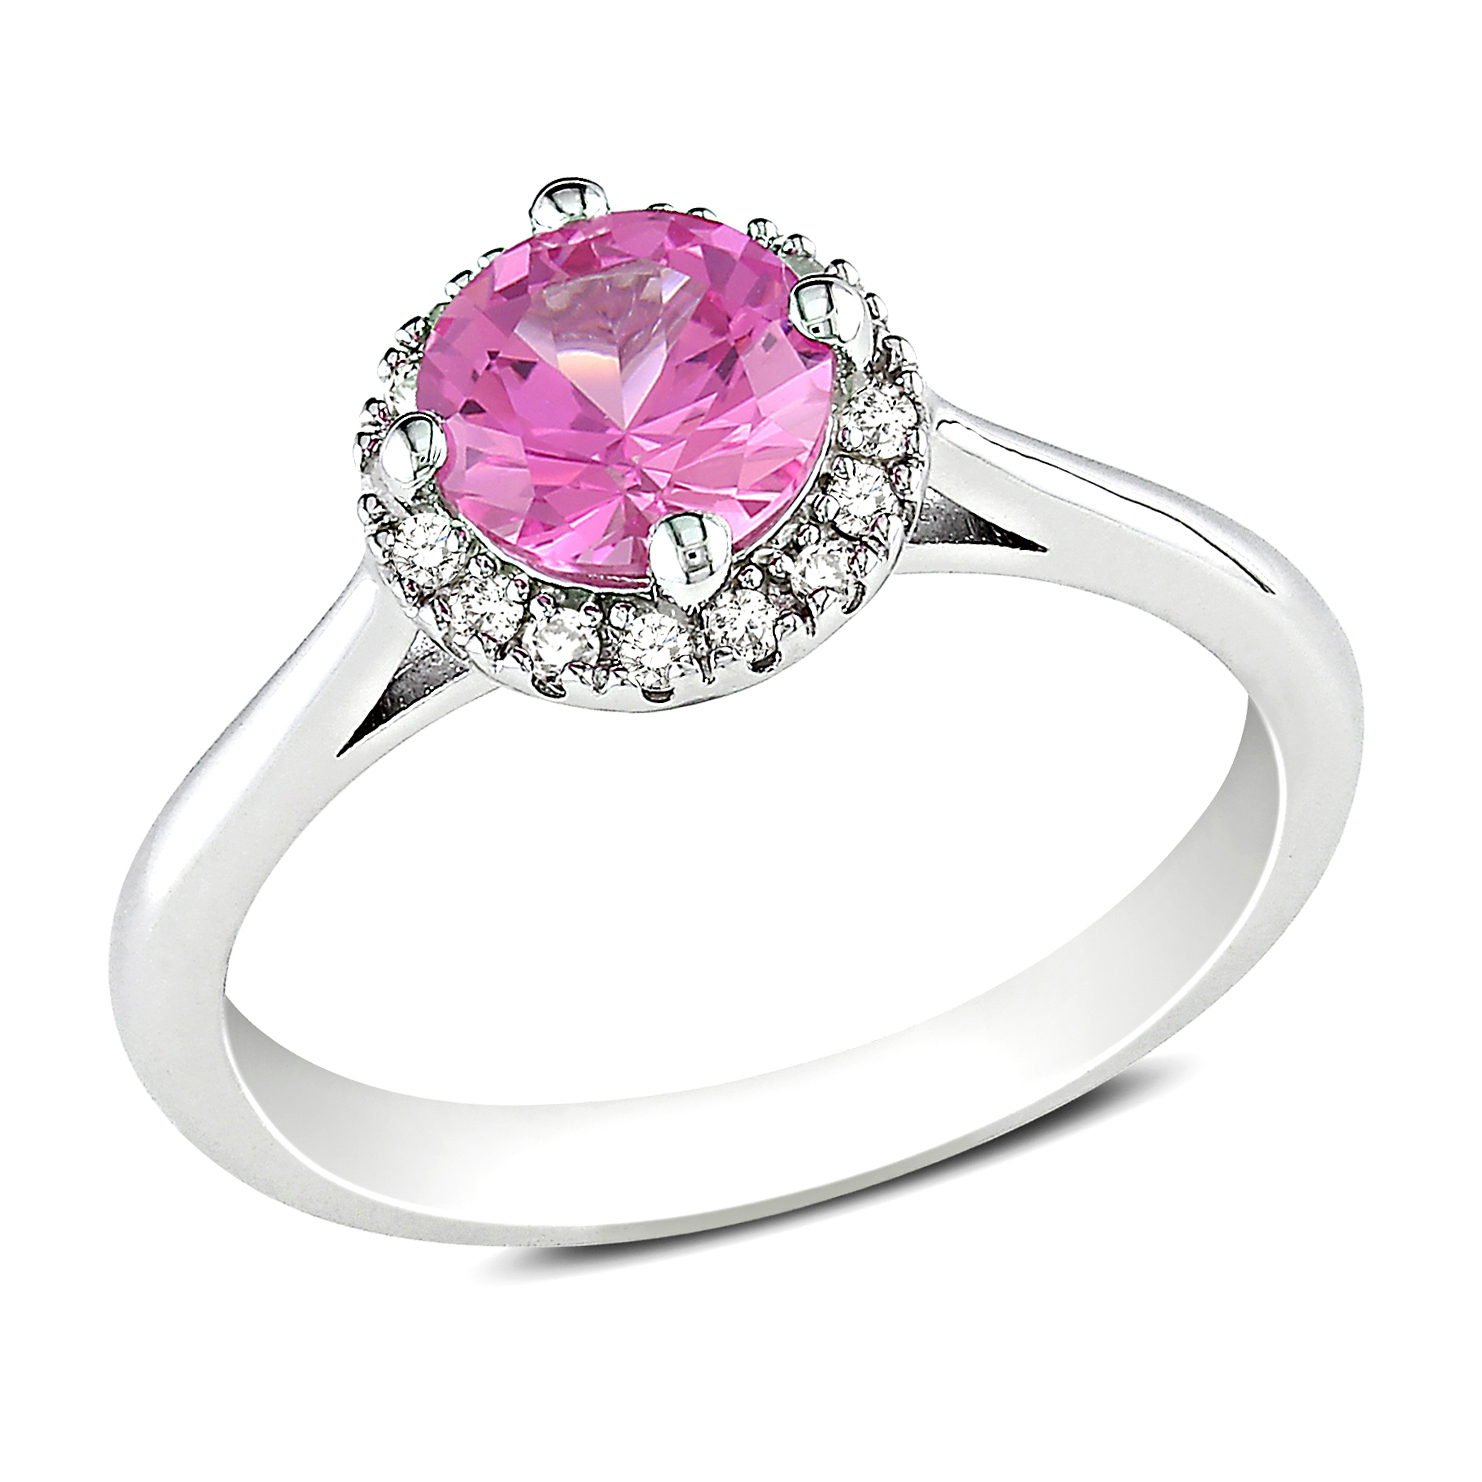 1/10 Carat T.W. Diamond and 1.07 Carat T.G.W. Created Pink Sapphire Fashion Ring in Sterling Silver GH I3